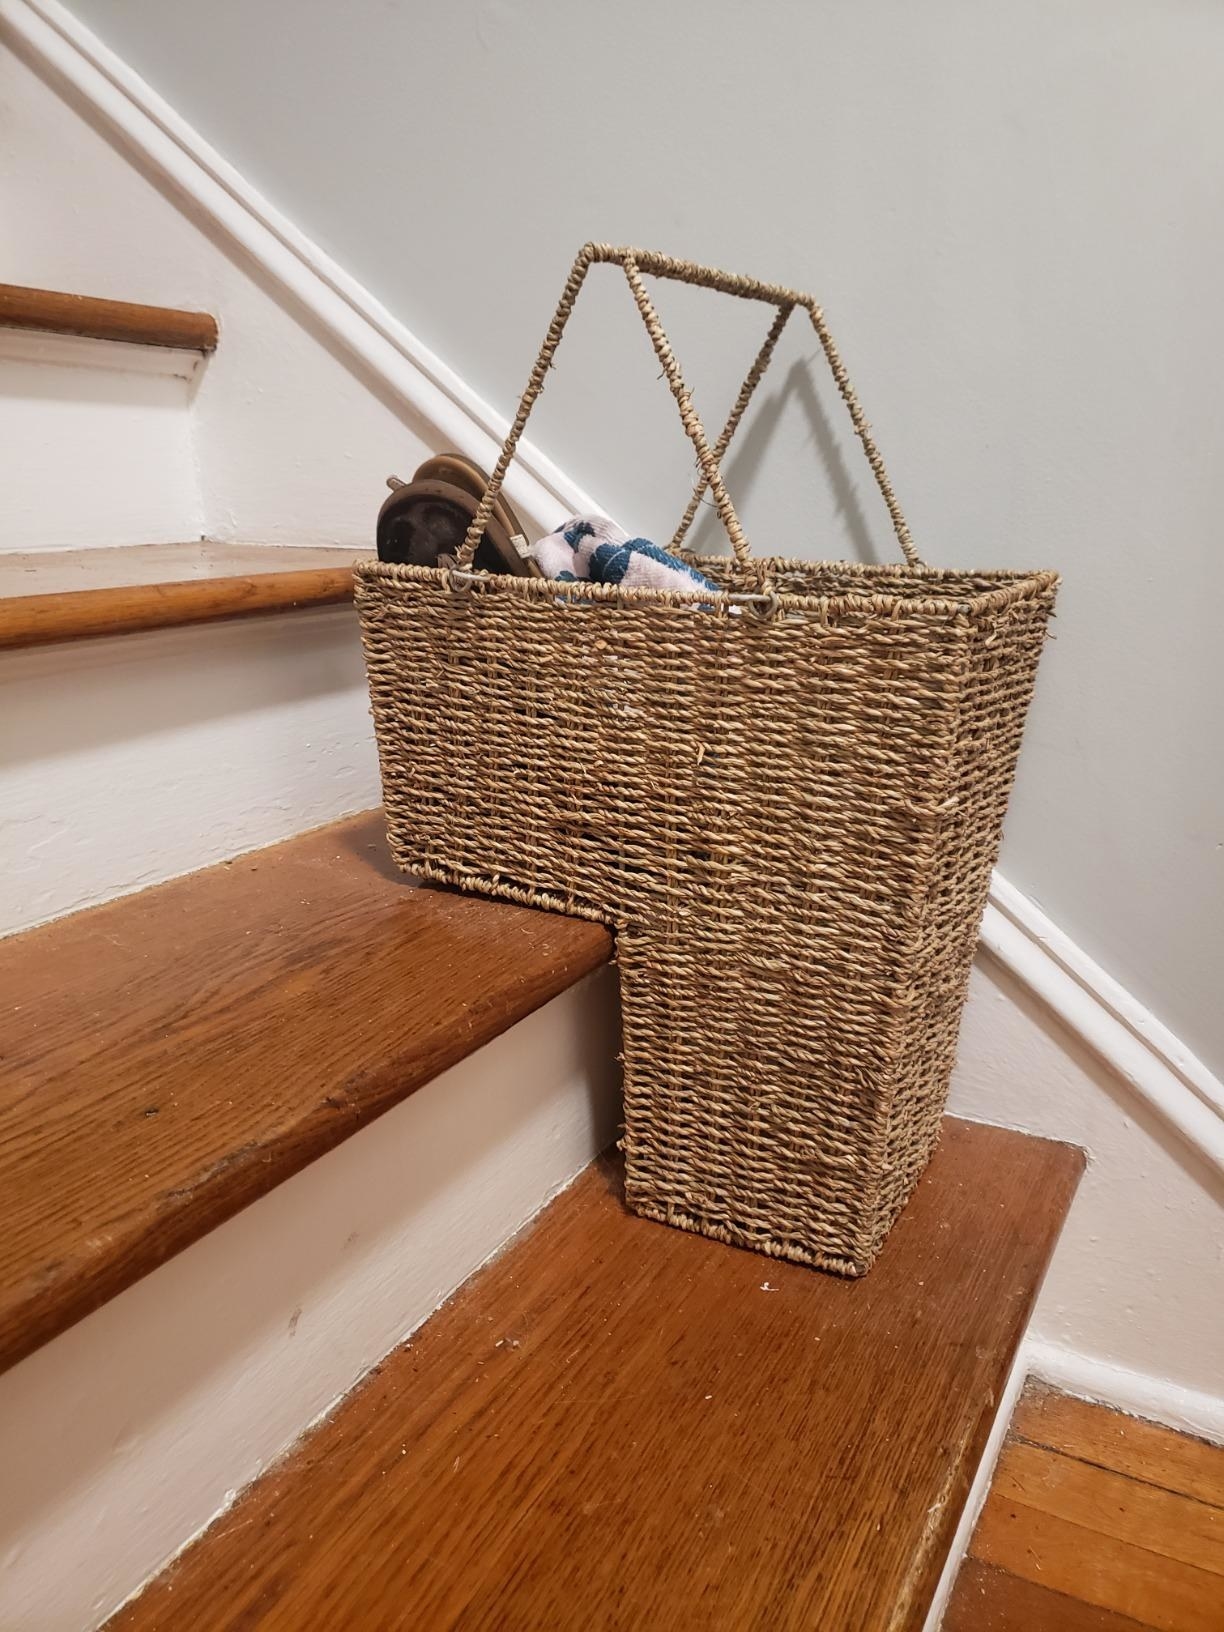 the two tier wicker basket, which is shaped like an L and sits on two steps